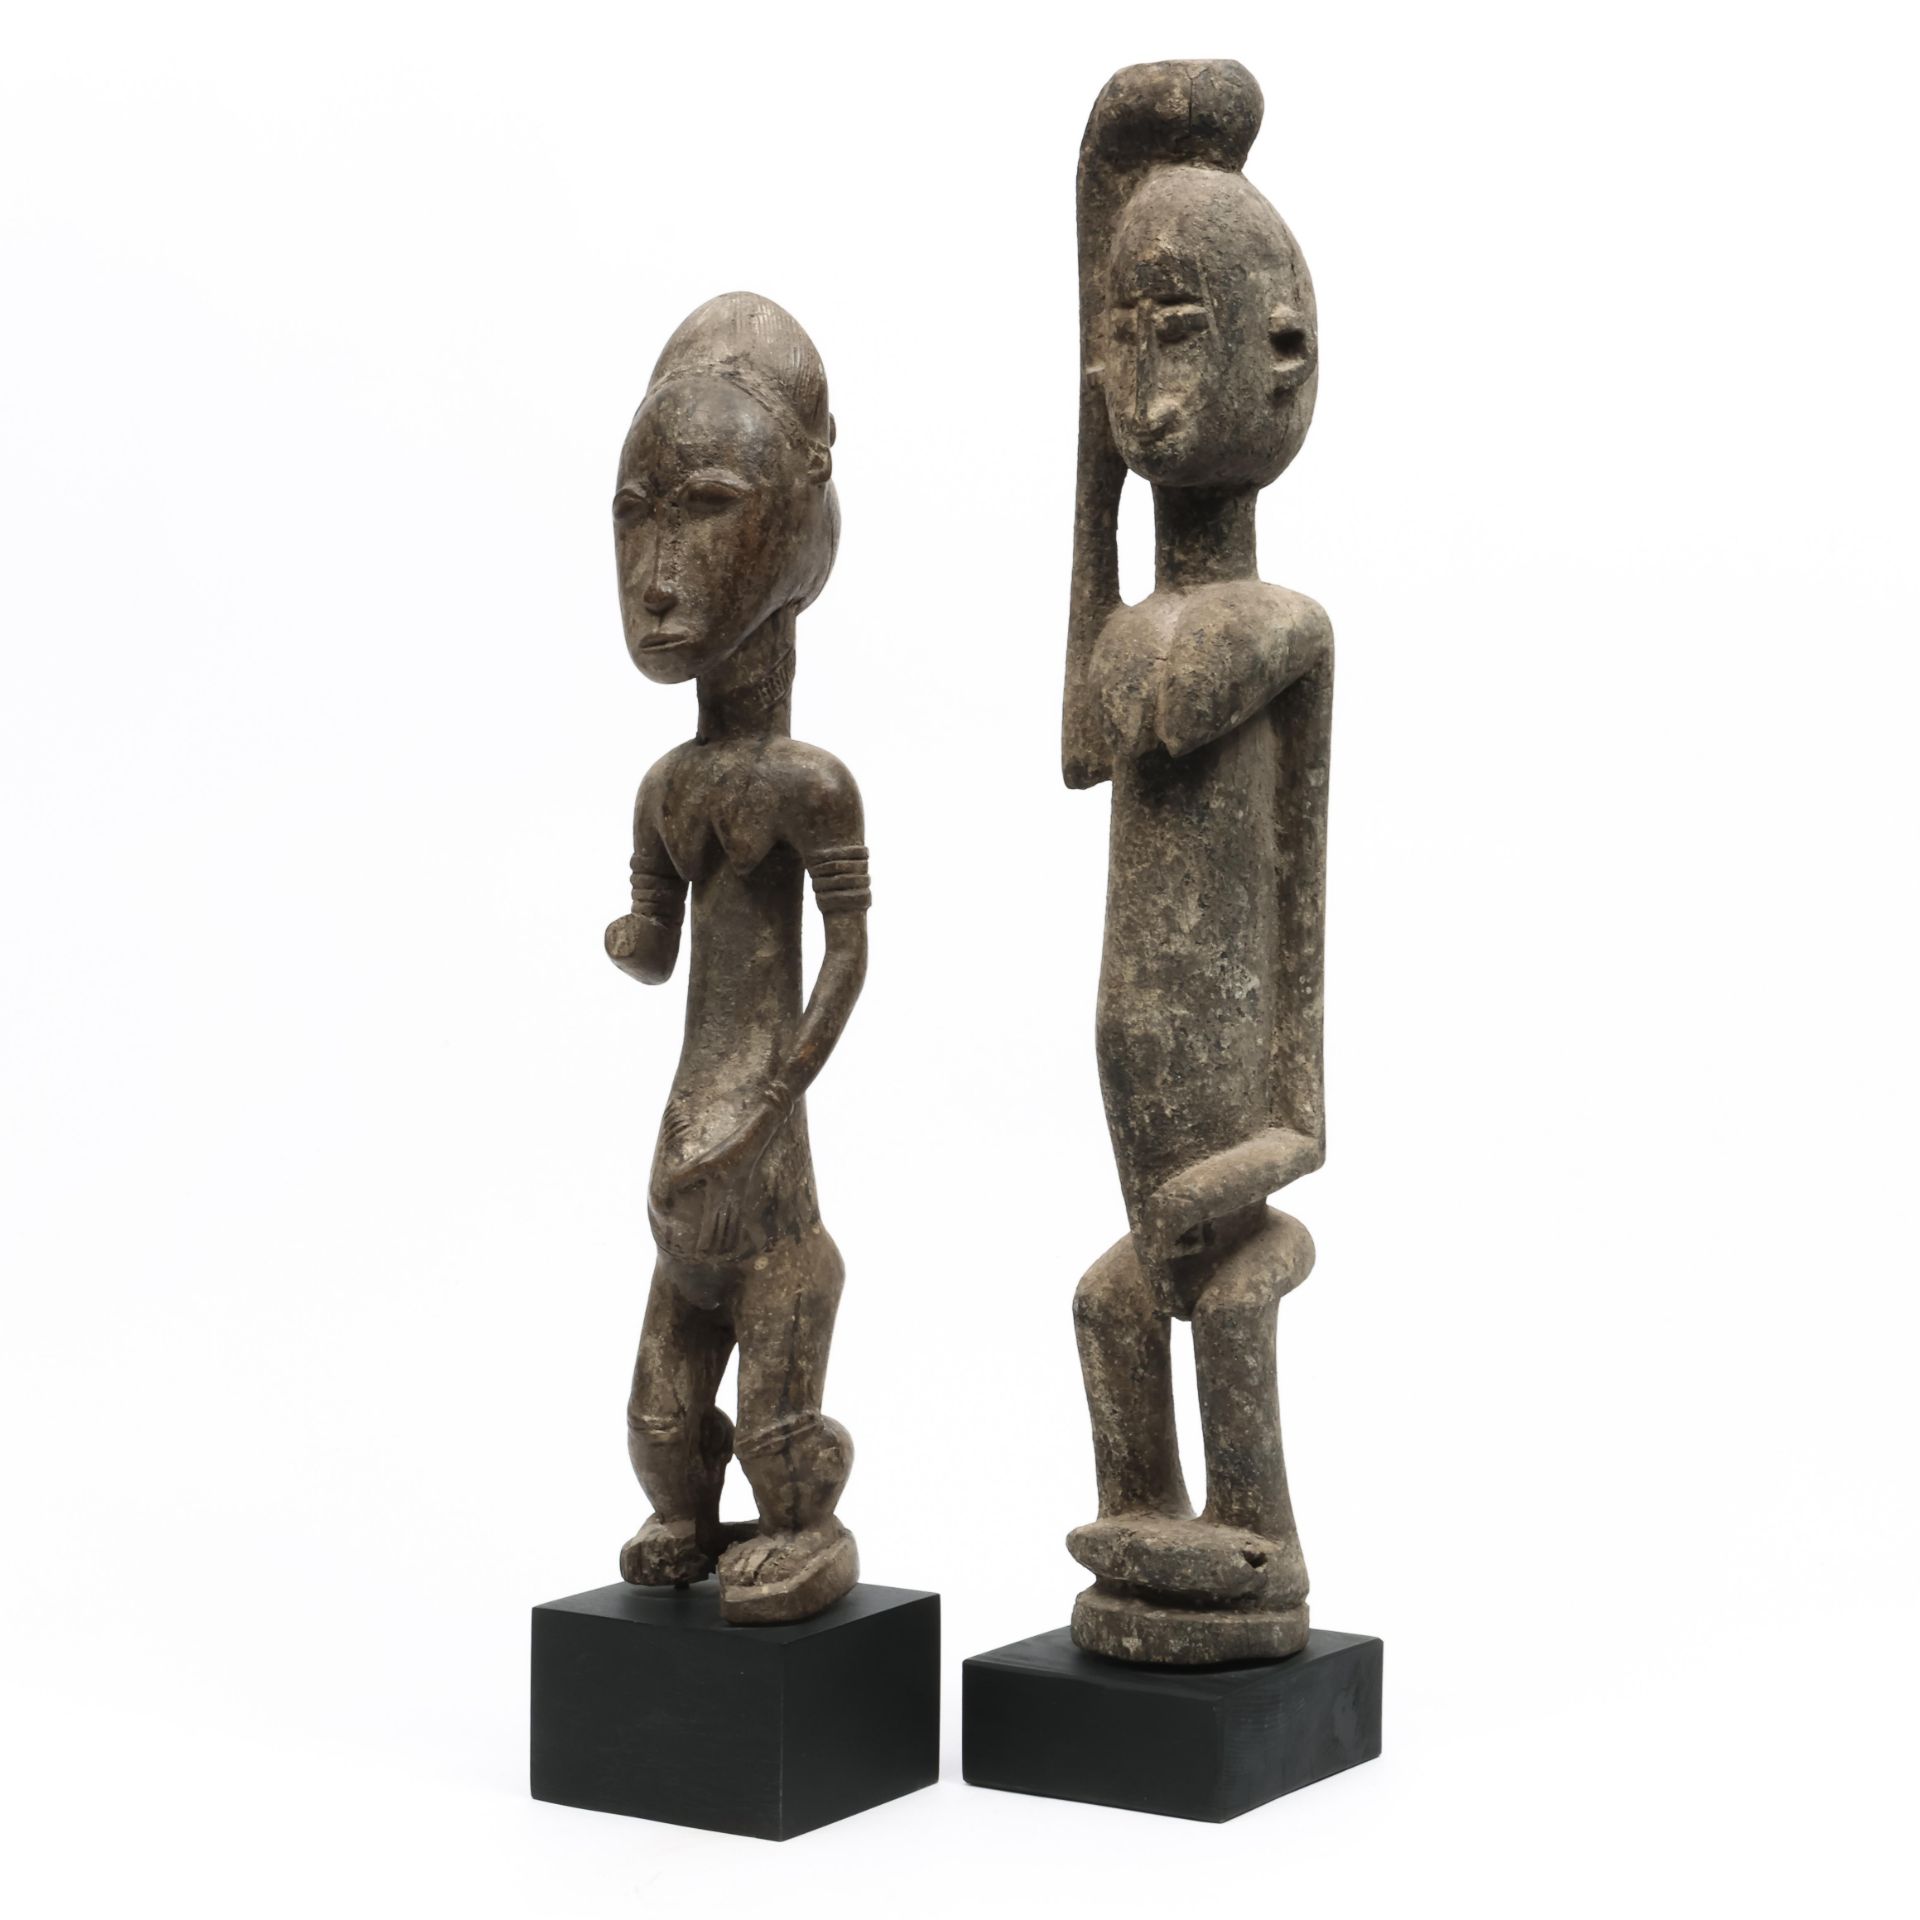 An African standing female figure with one arm missing and a wooden figure with one raised arm.